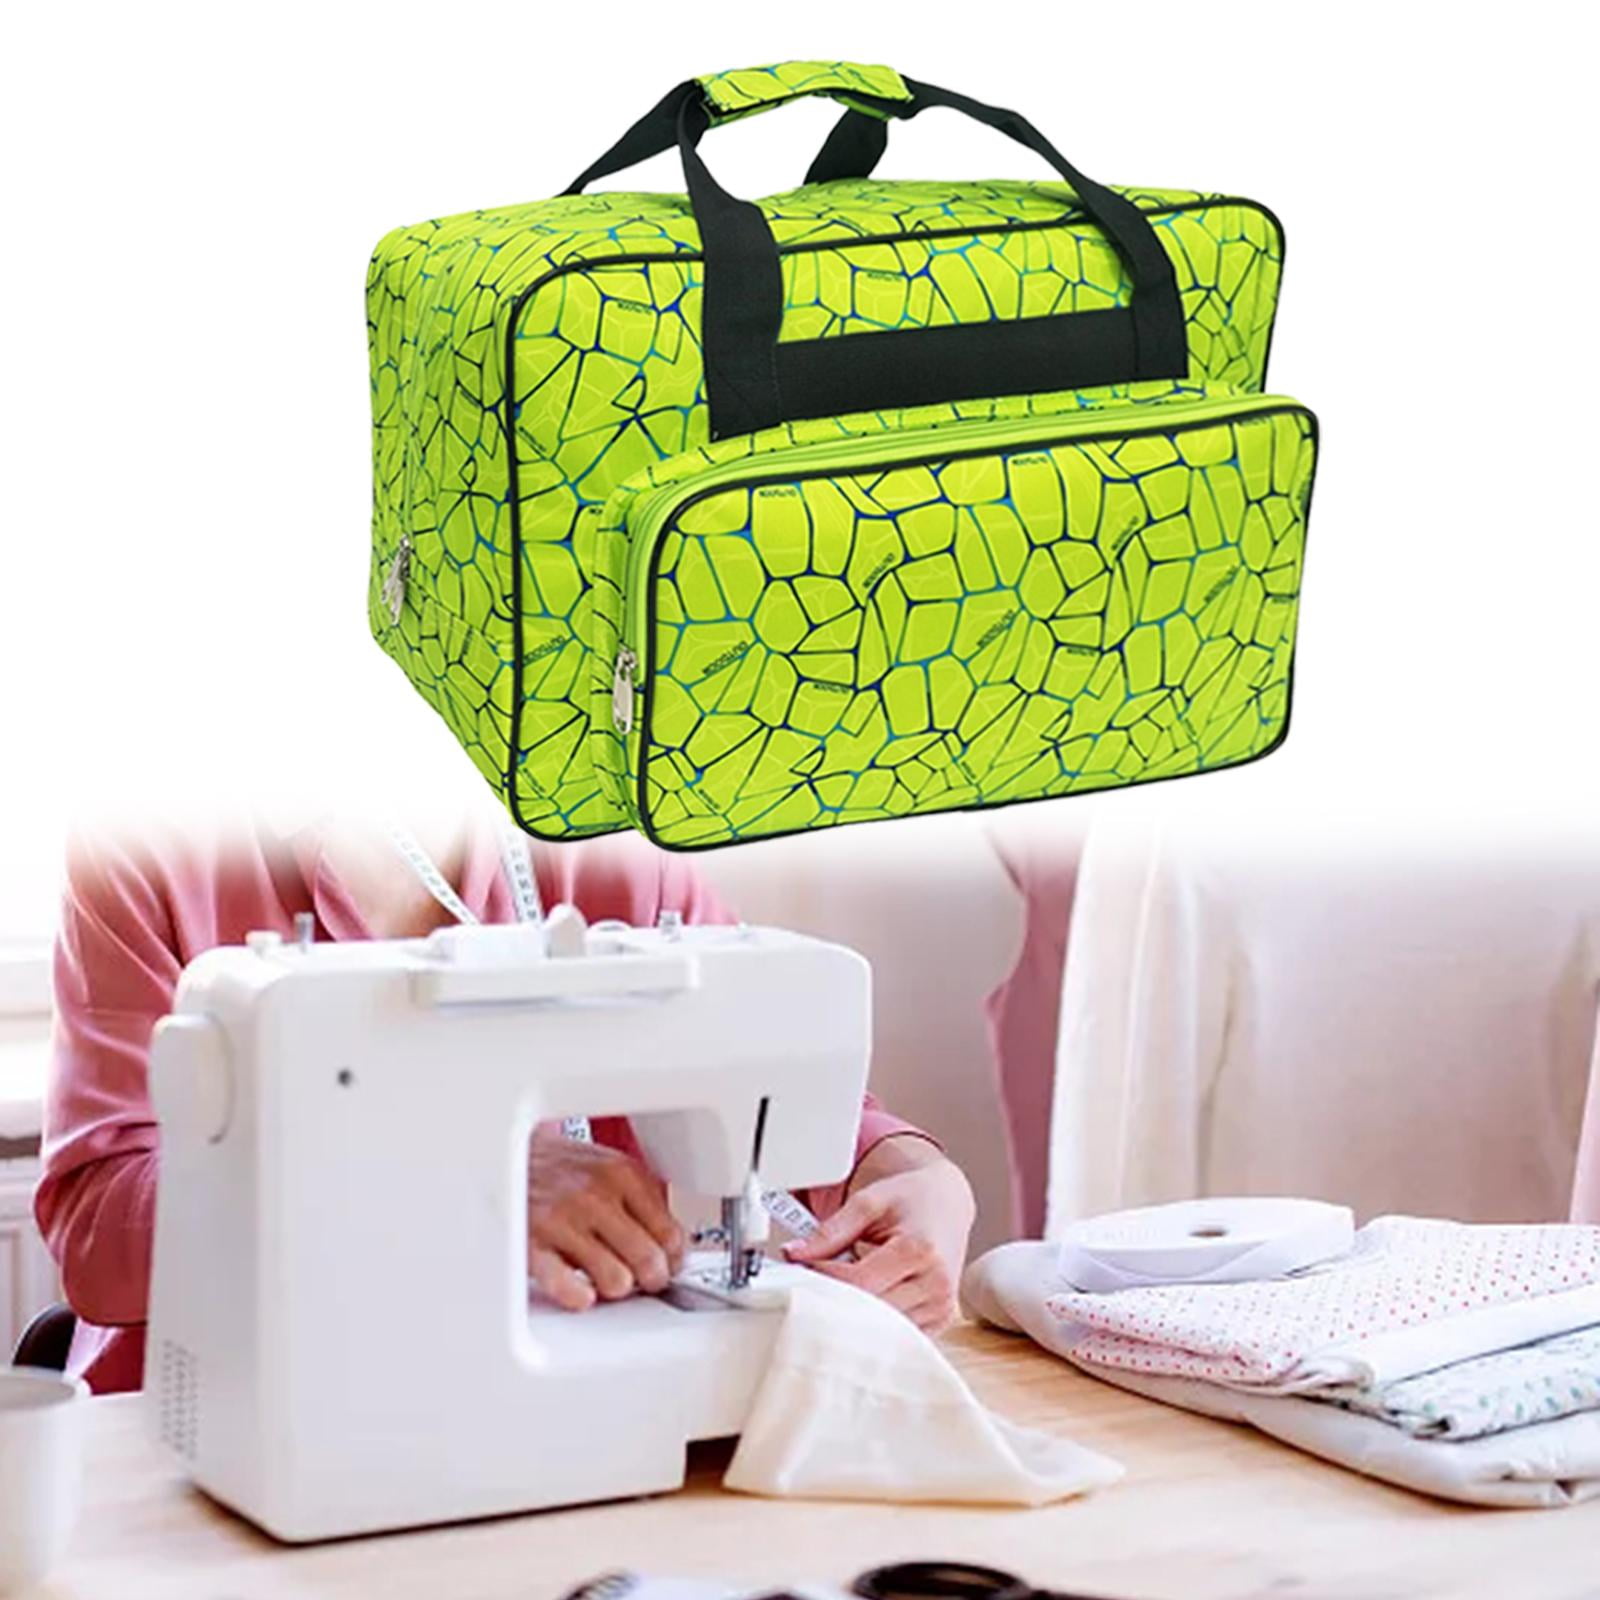 Sewing Machine Carrying Case, Carry Tote Bag, Portable Storag with